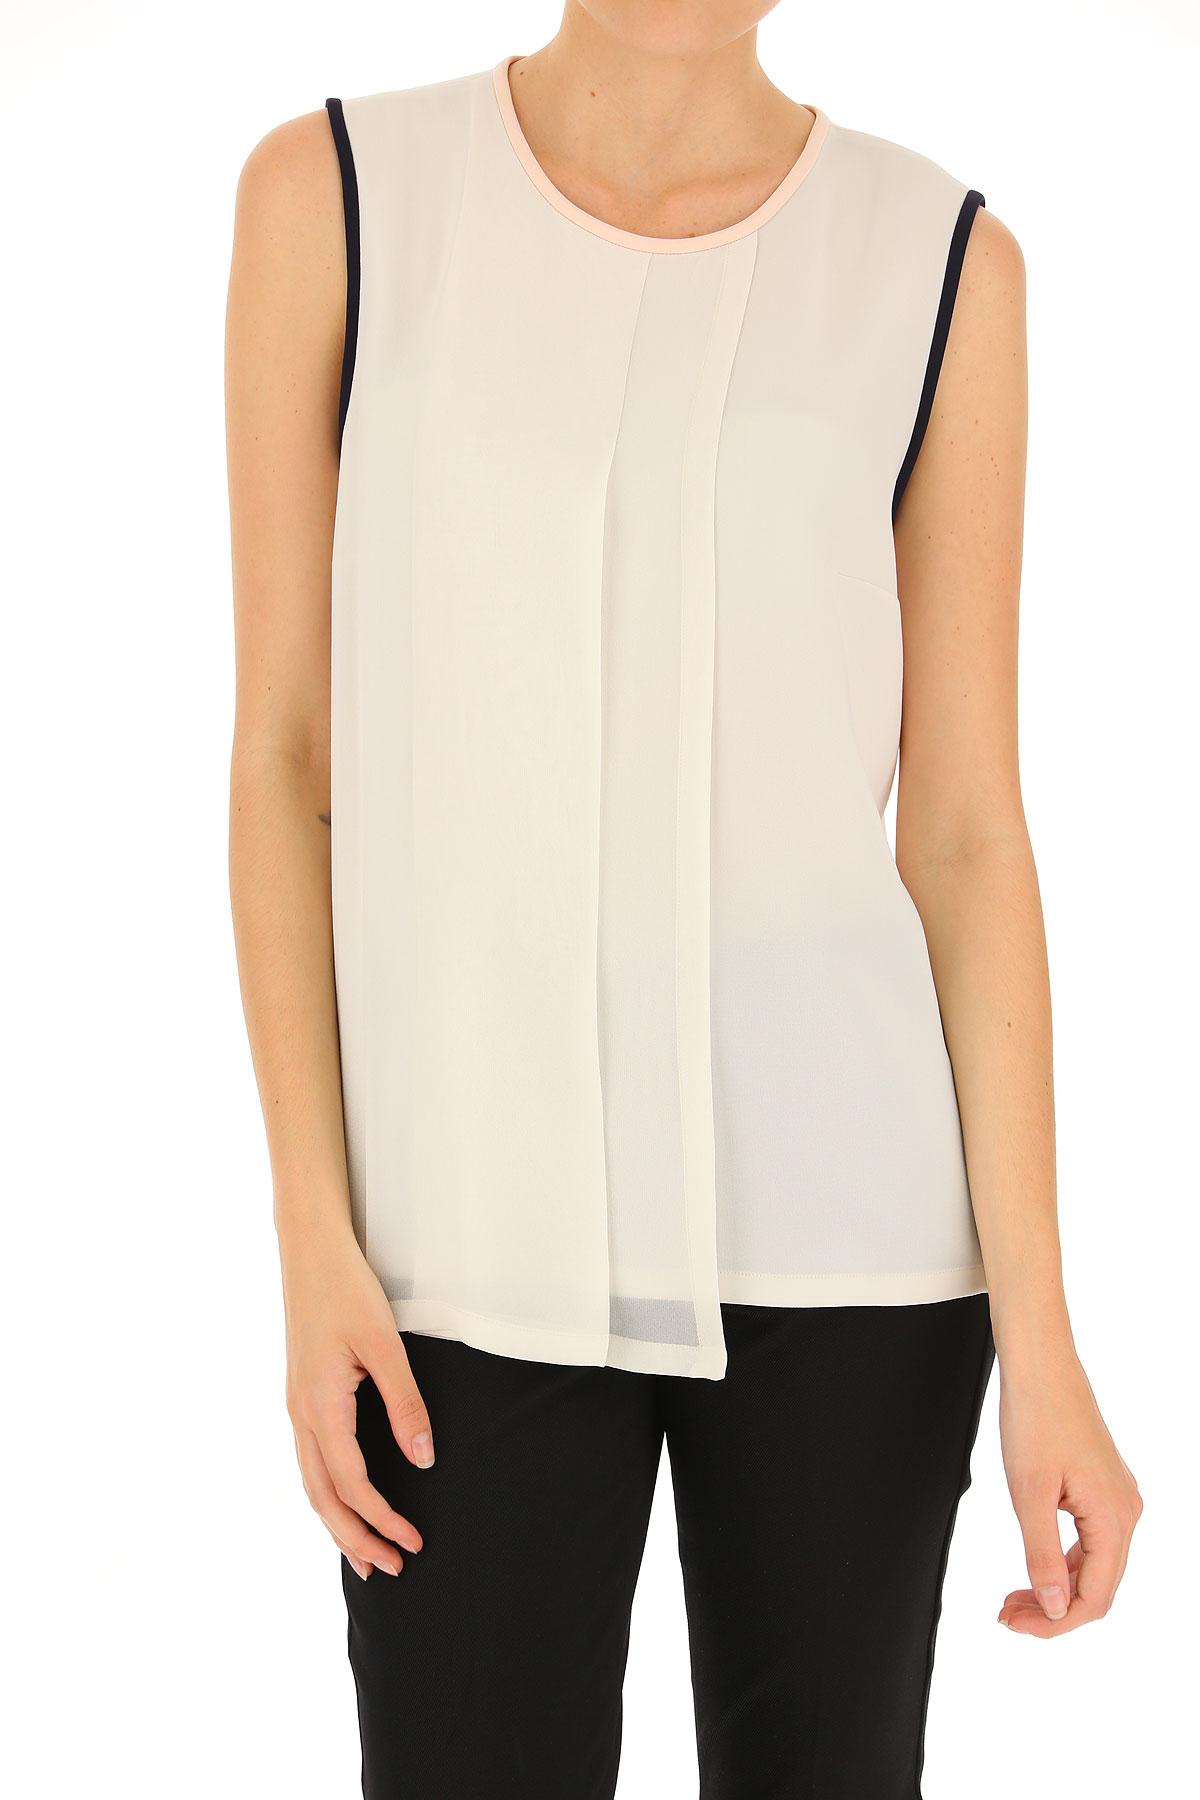 Max Mara Synthetic Top For Women in White - Lyst